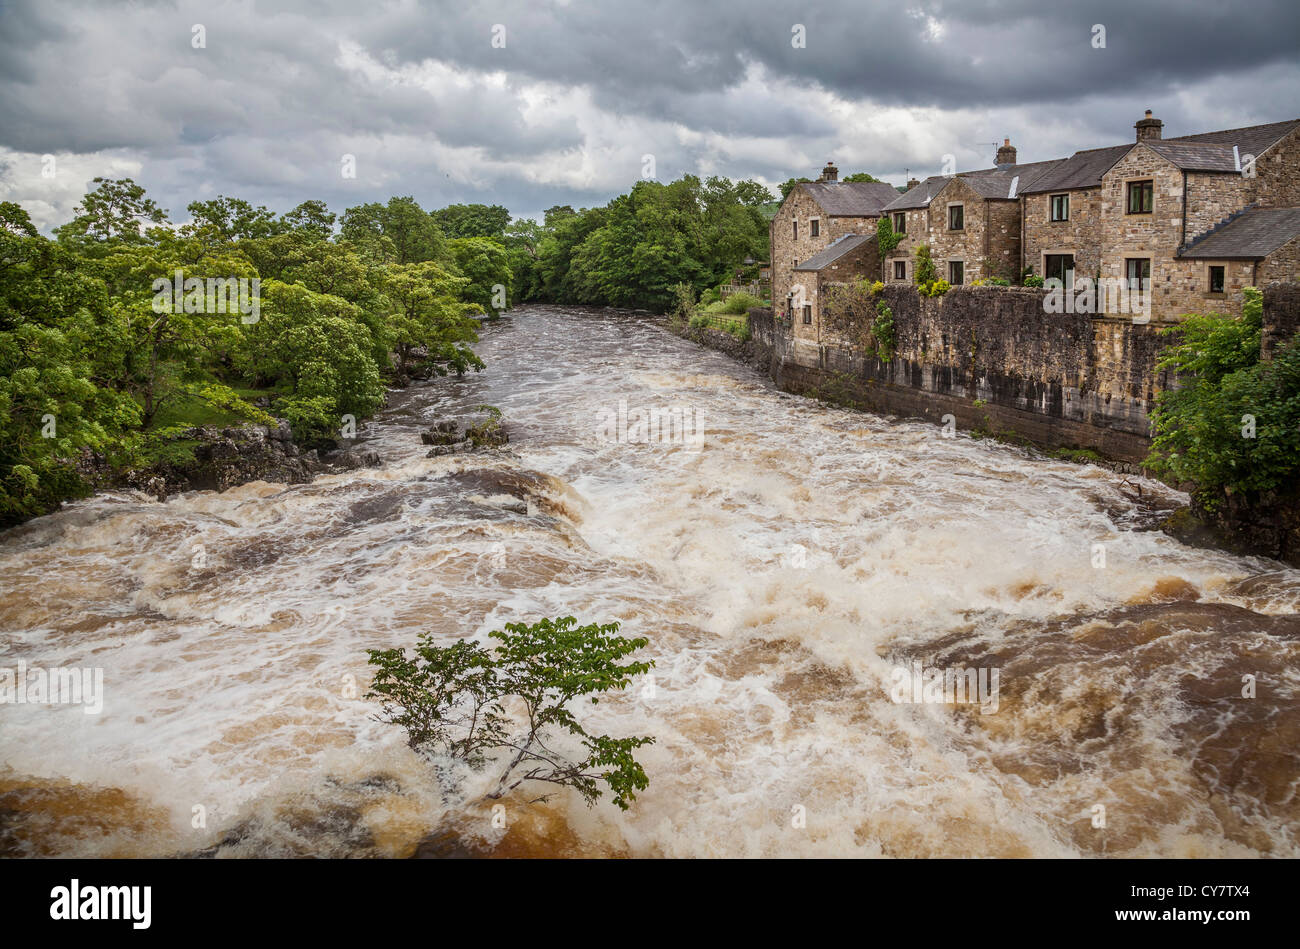 The river Wharf at Linton Falls after heavy rain, North Yorkshire. Stock Photo